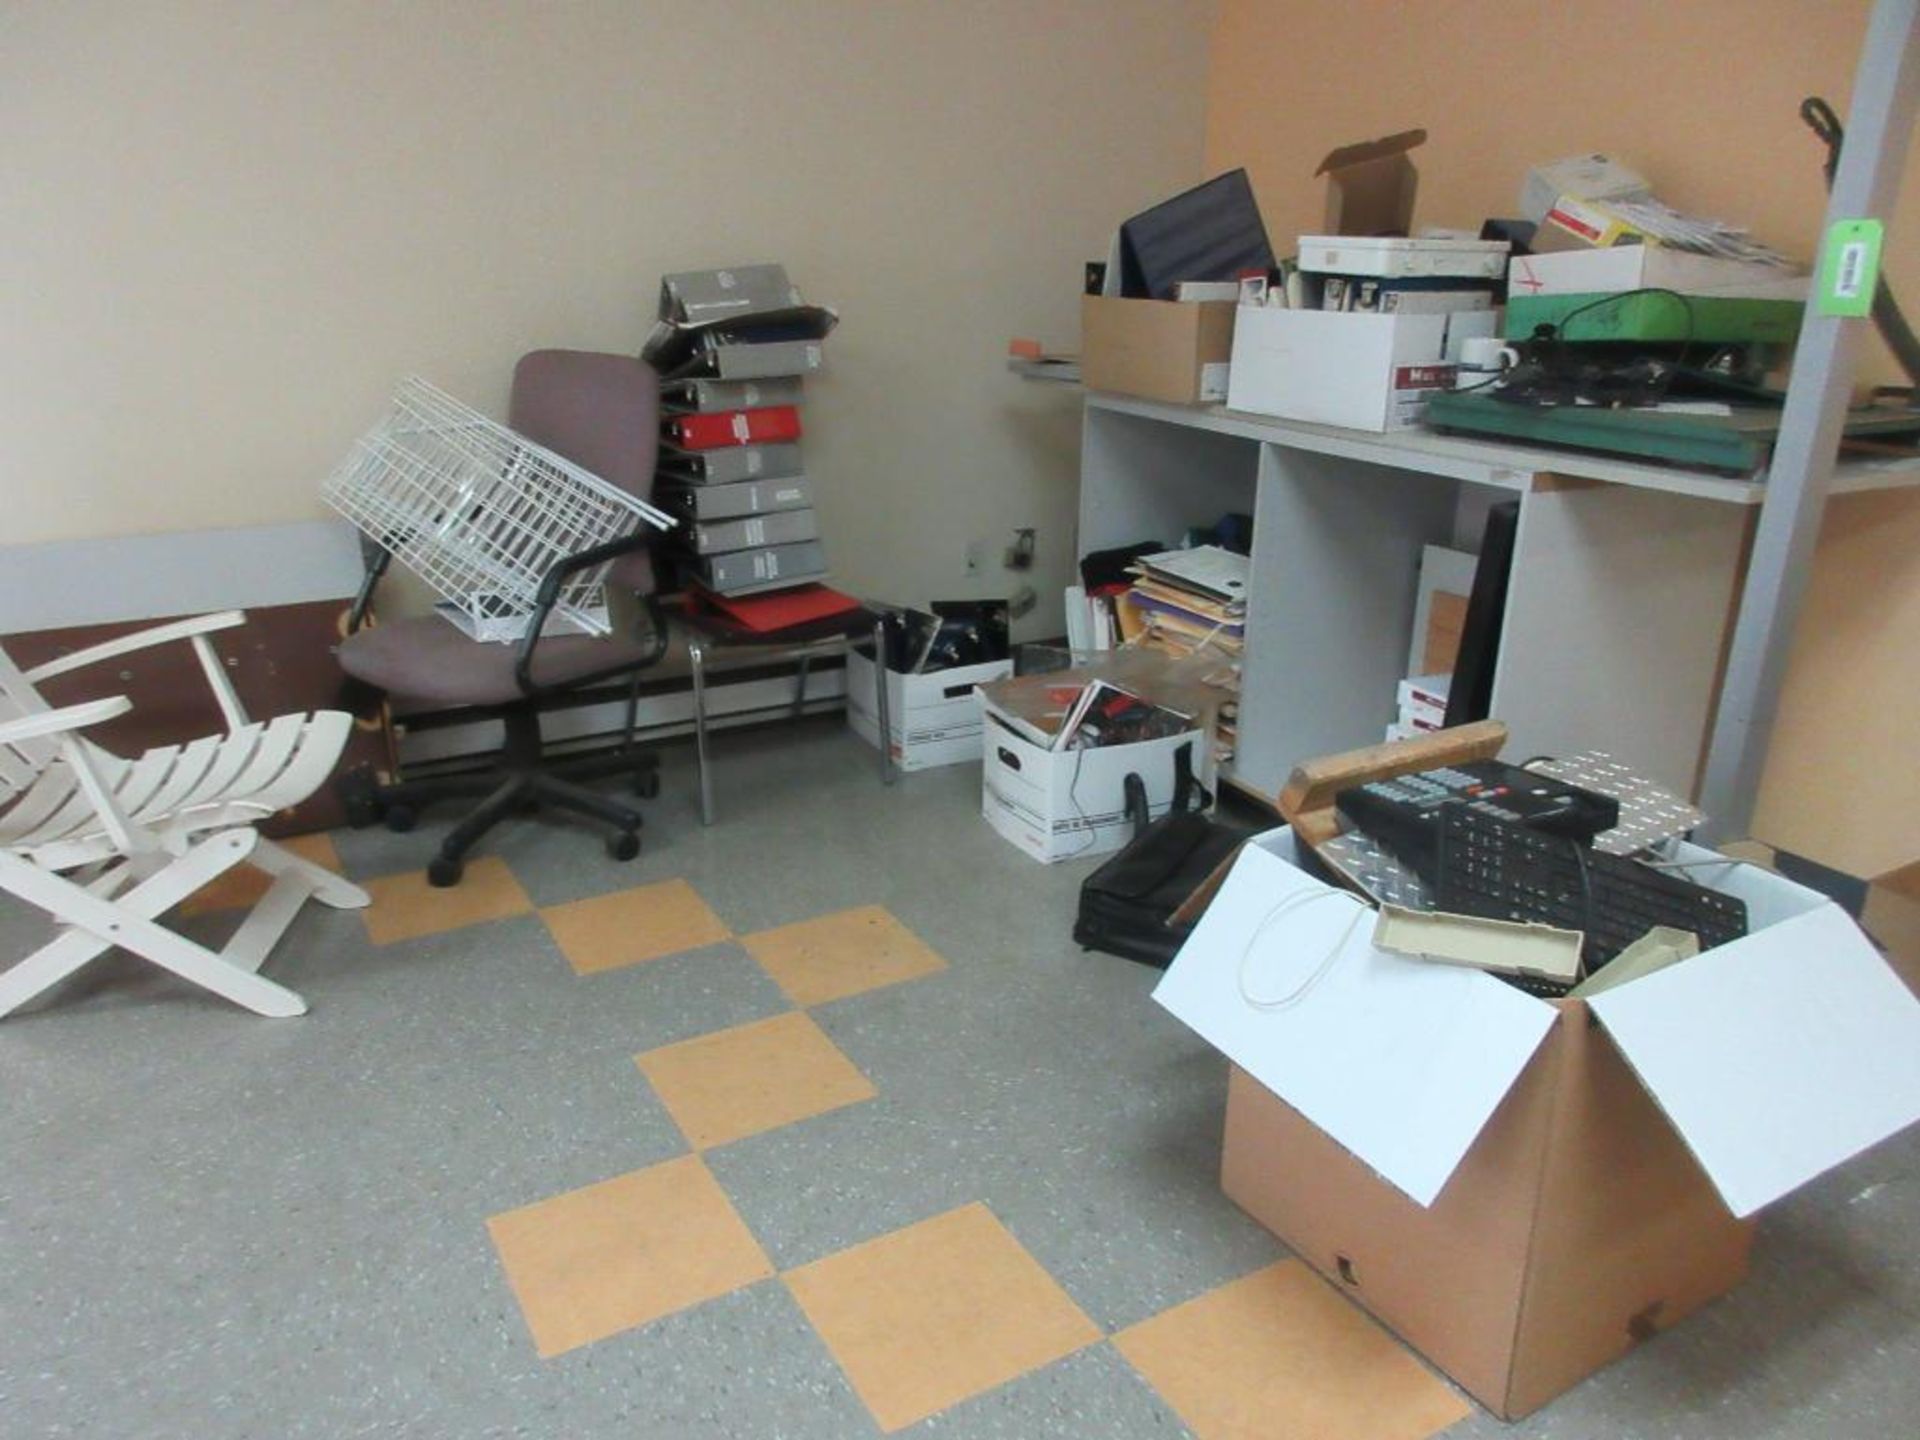 CONTENTS OF WORK AREA INCL 5 FILE CABINETS, 1 BLUEPRINT CABINET, 8 CHAIRS, 1 STAINLESS TABLE, 3 BOOK - Image 7 of 16